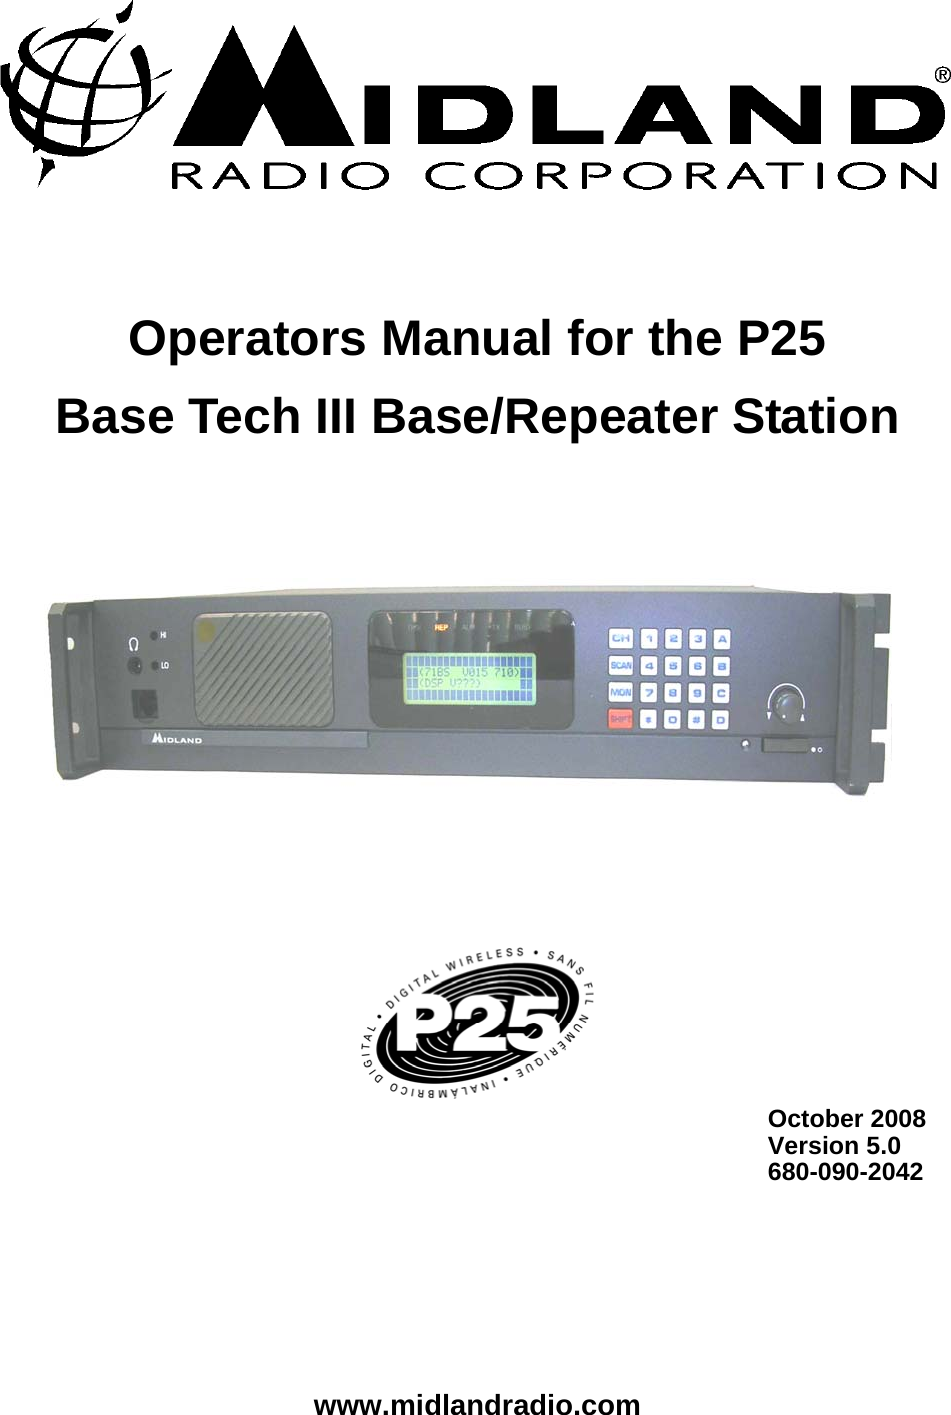   Operators Manual for the P25 Base Tech III Base/Repeater Station                   October 2008     Version 5.0     680-090-2042                  www.midlandradio.com 